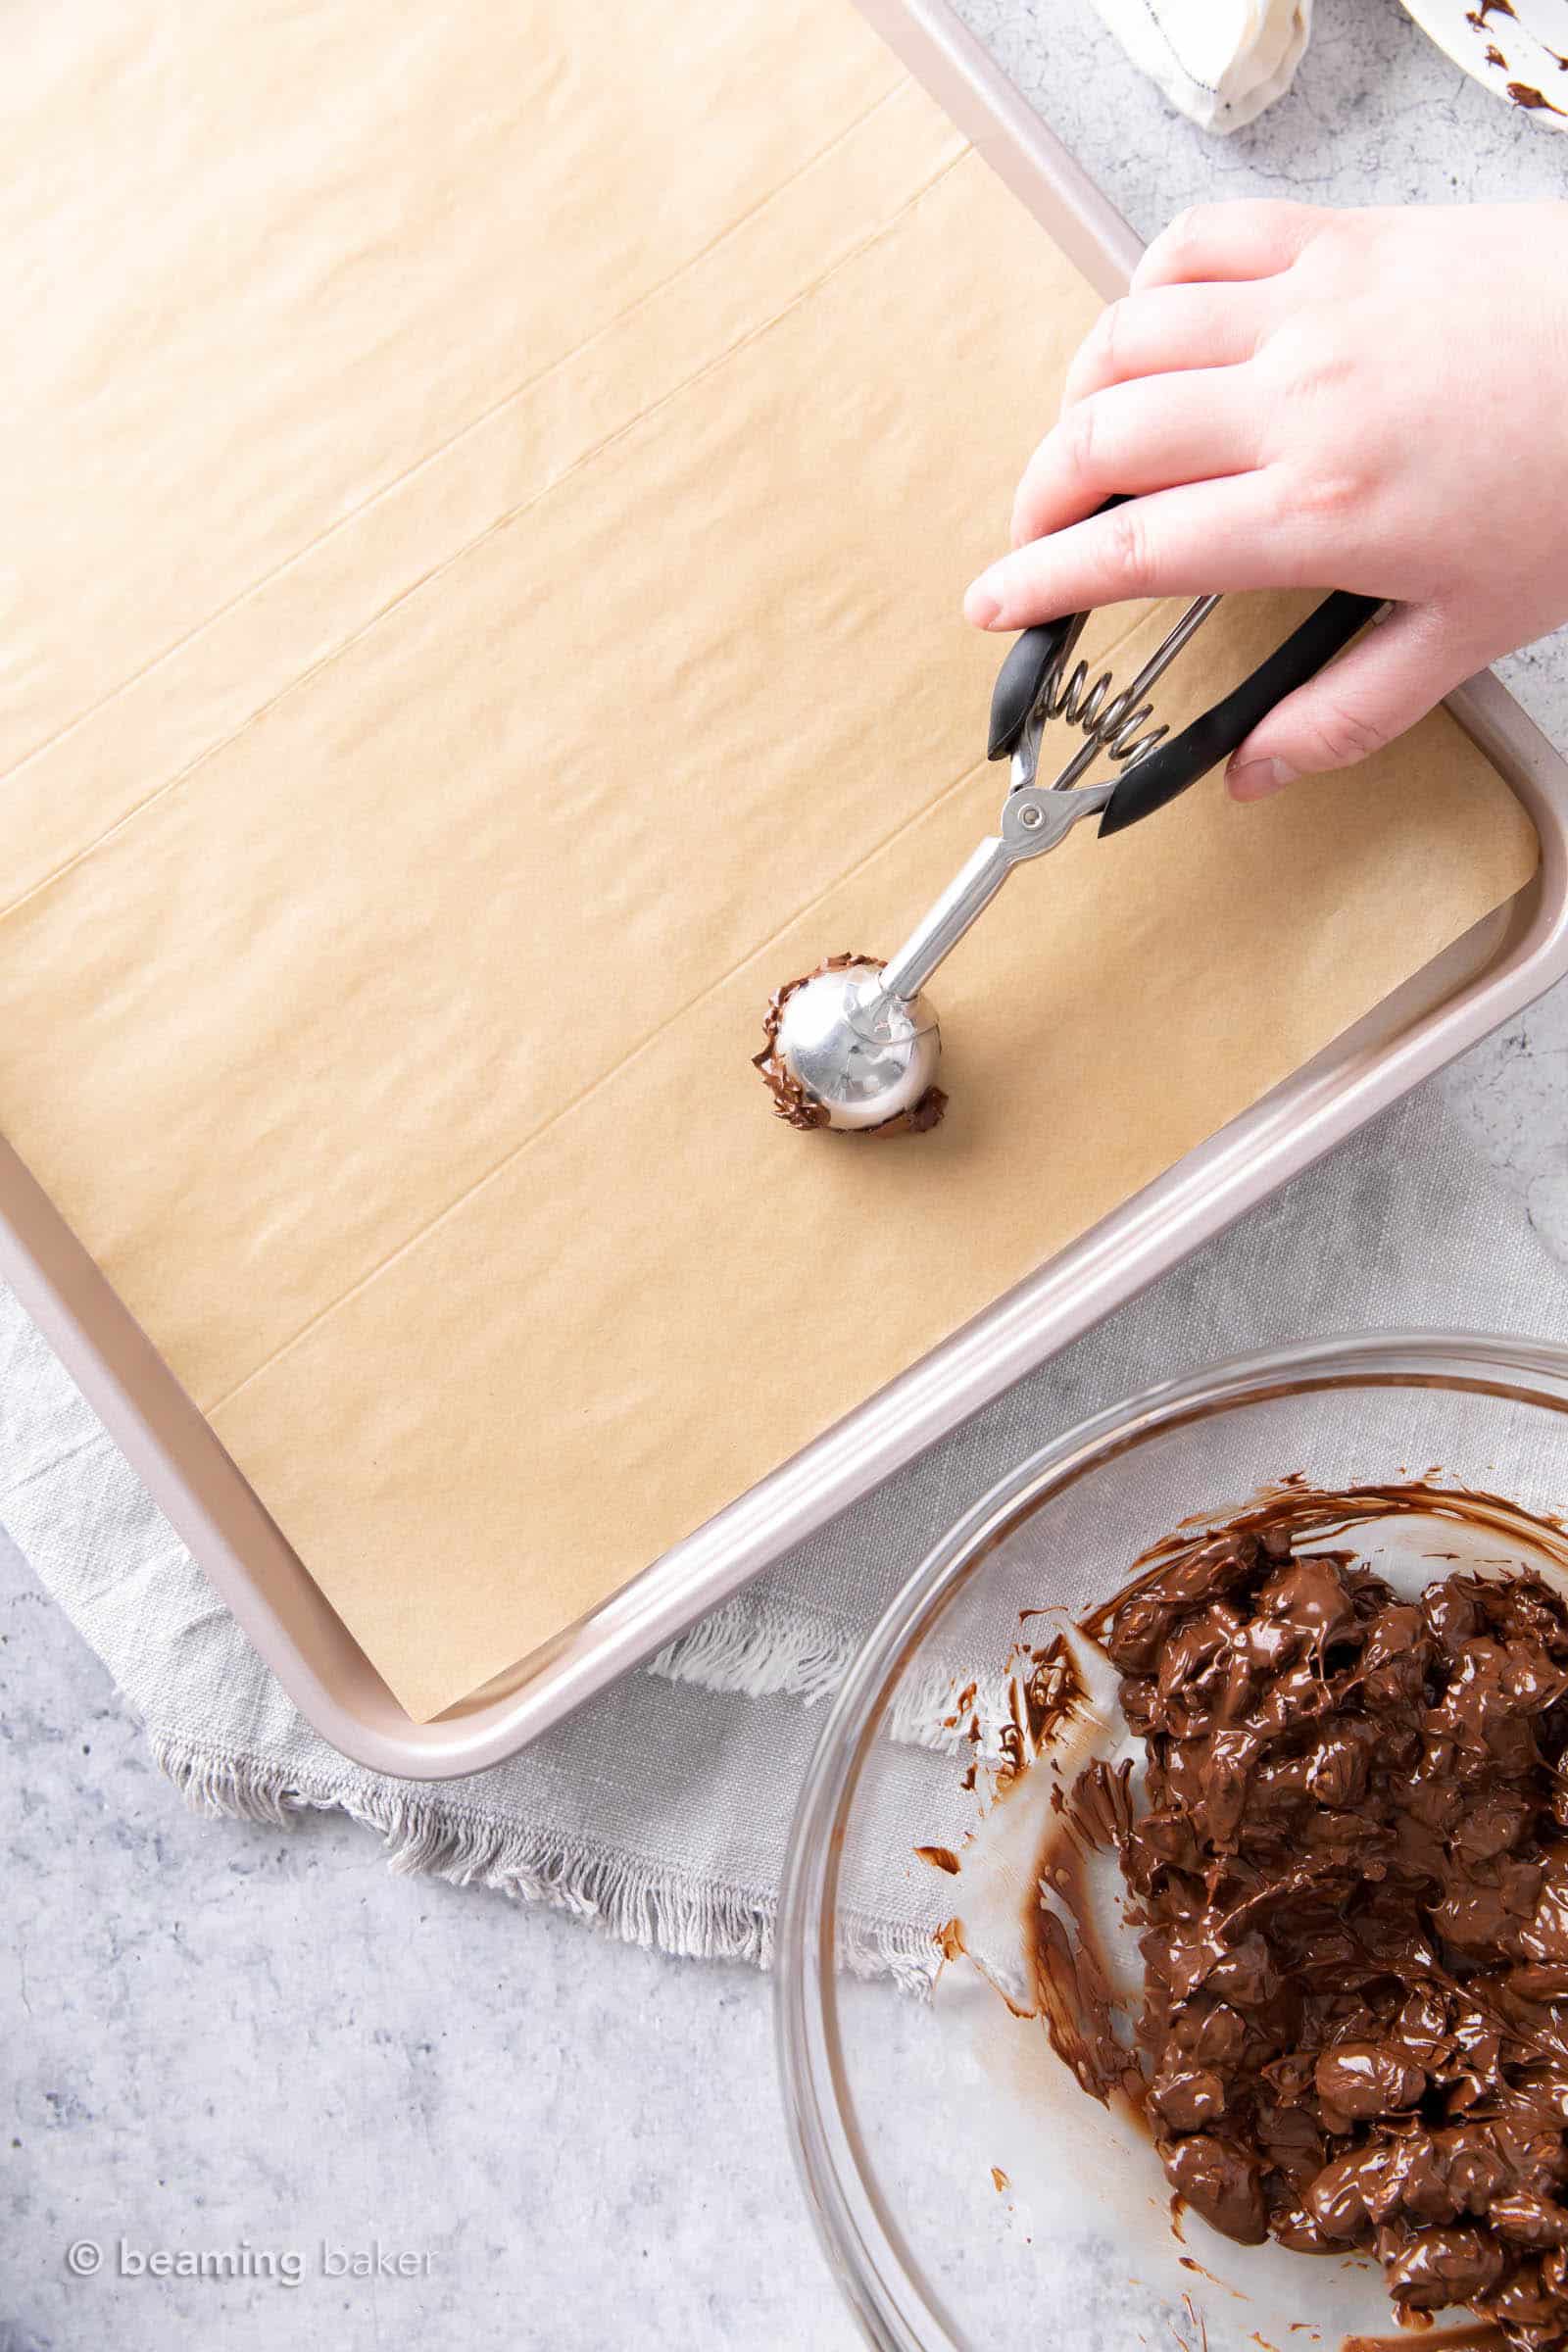 One hand holding a food scoop, dropping dark chocolate almond coconut mixture onto a lined baking sheet